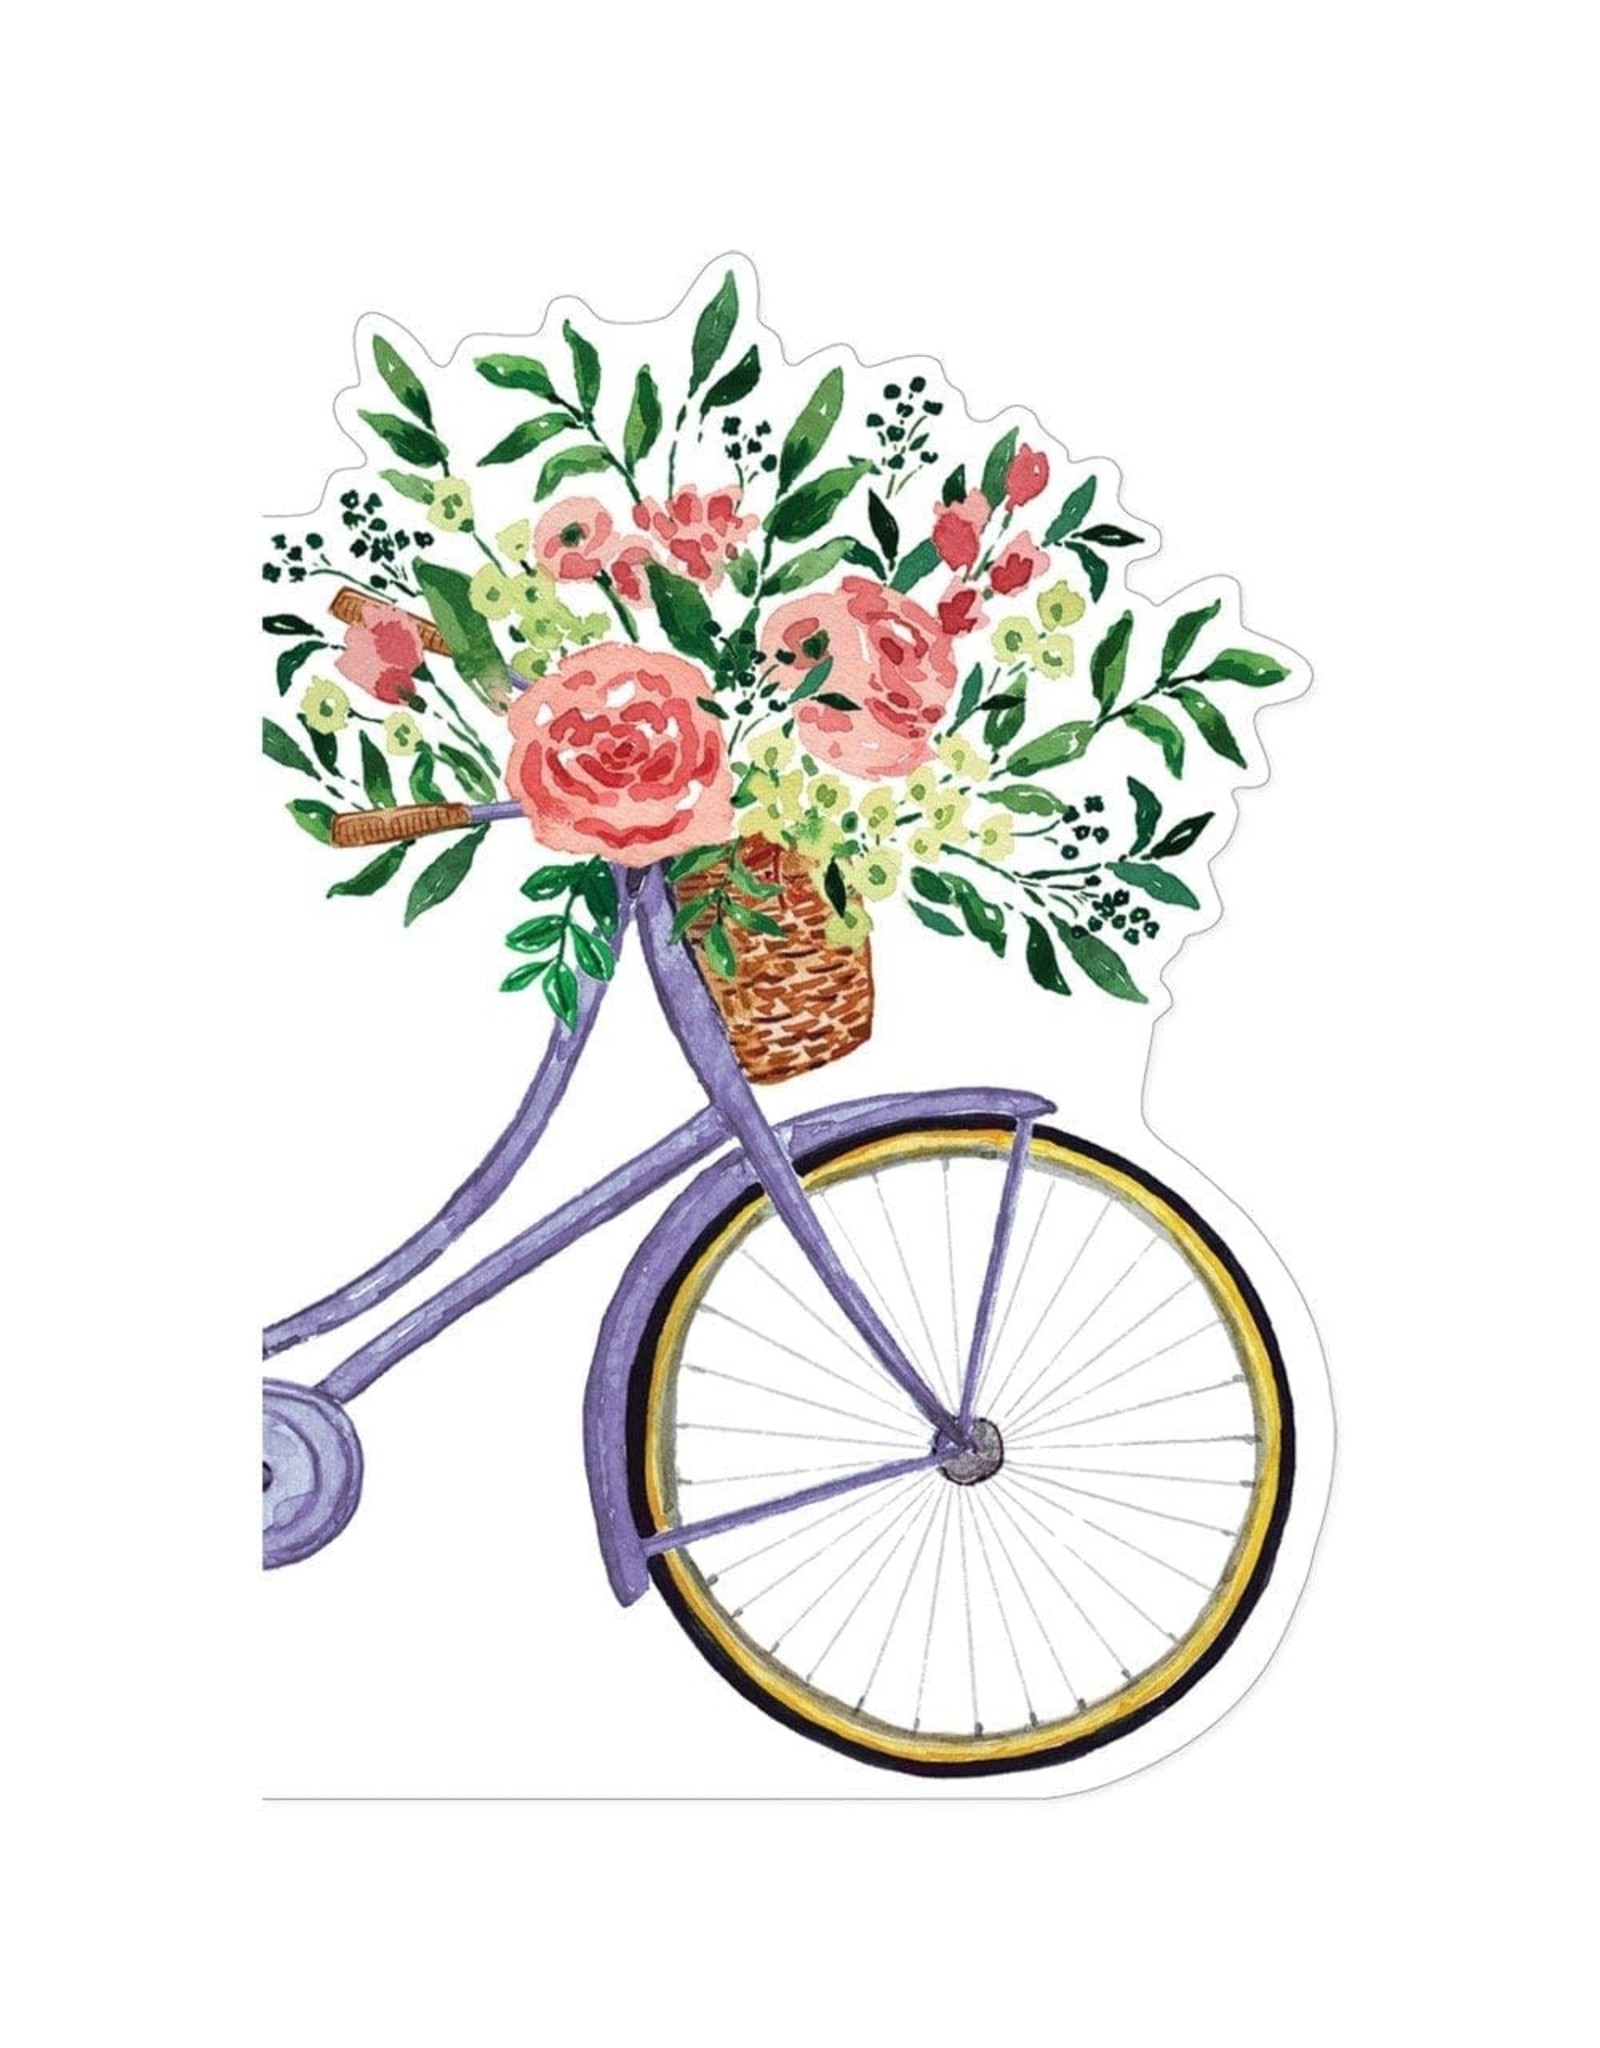 Caspari Mothers Day Cards Bicycle With Flowers Mother's Day Card